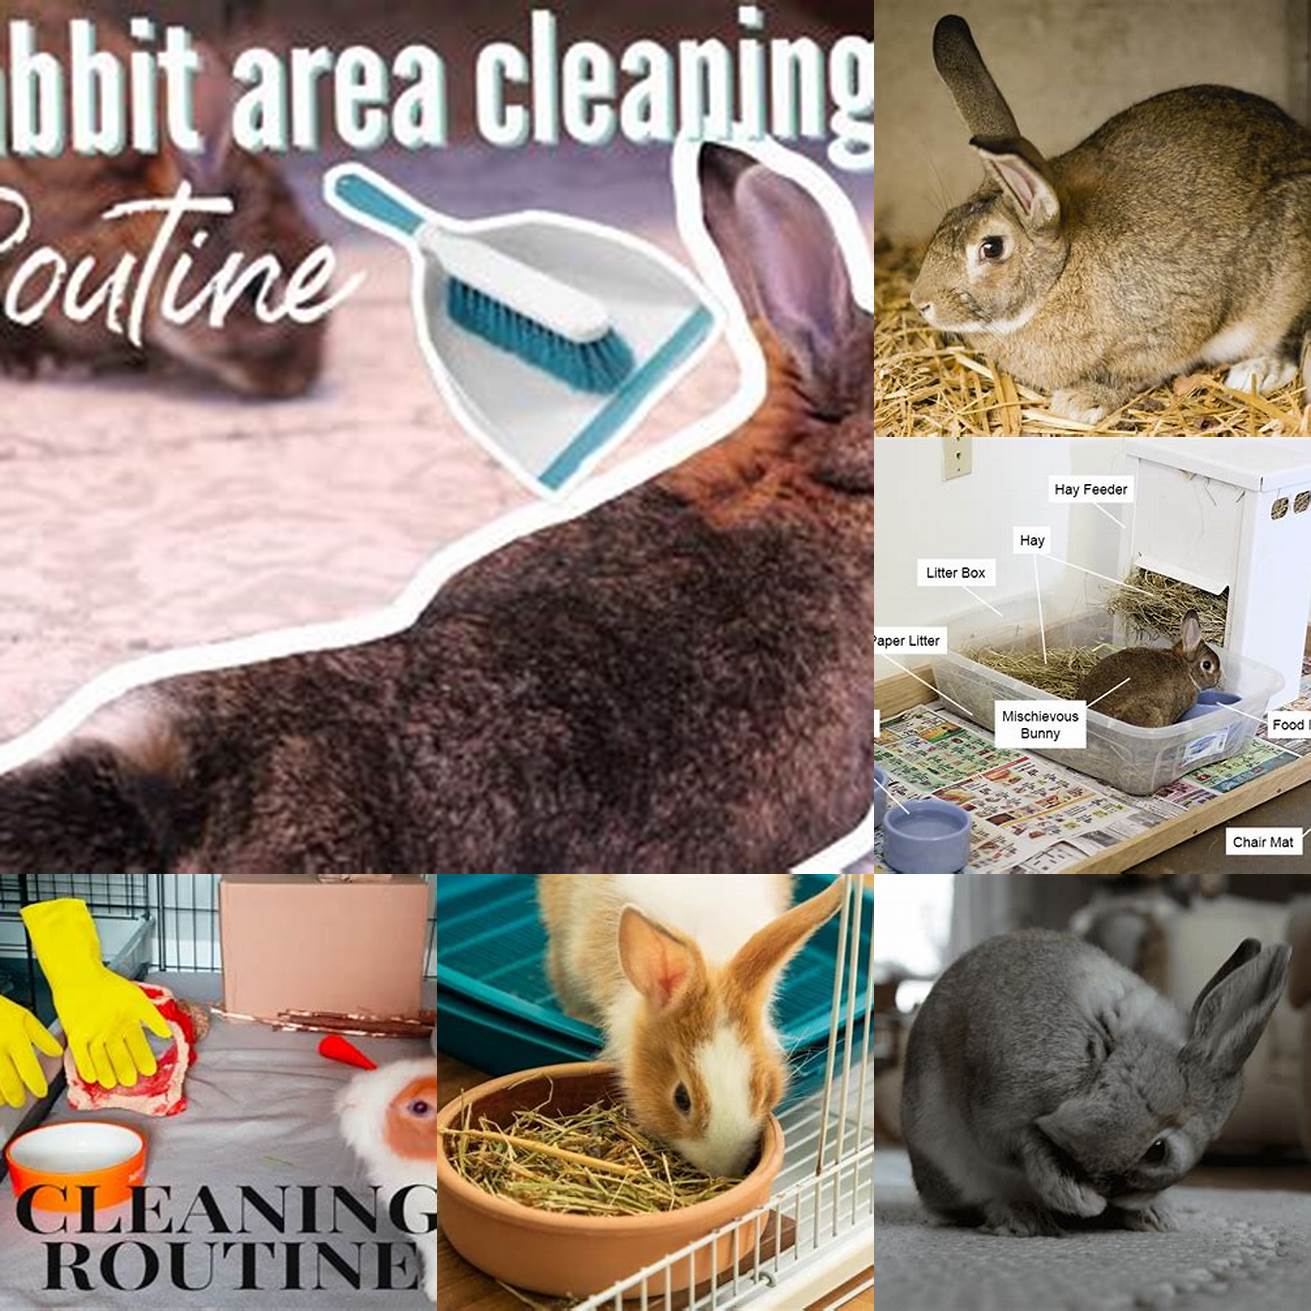 Image of a clean rabbit living area